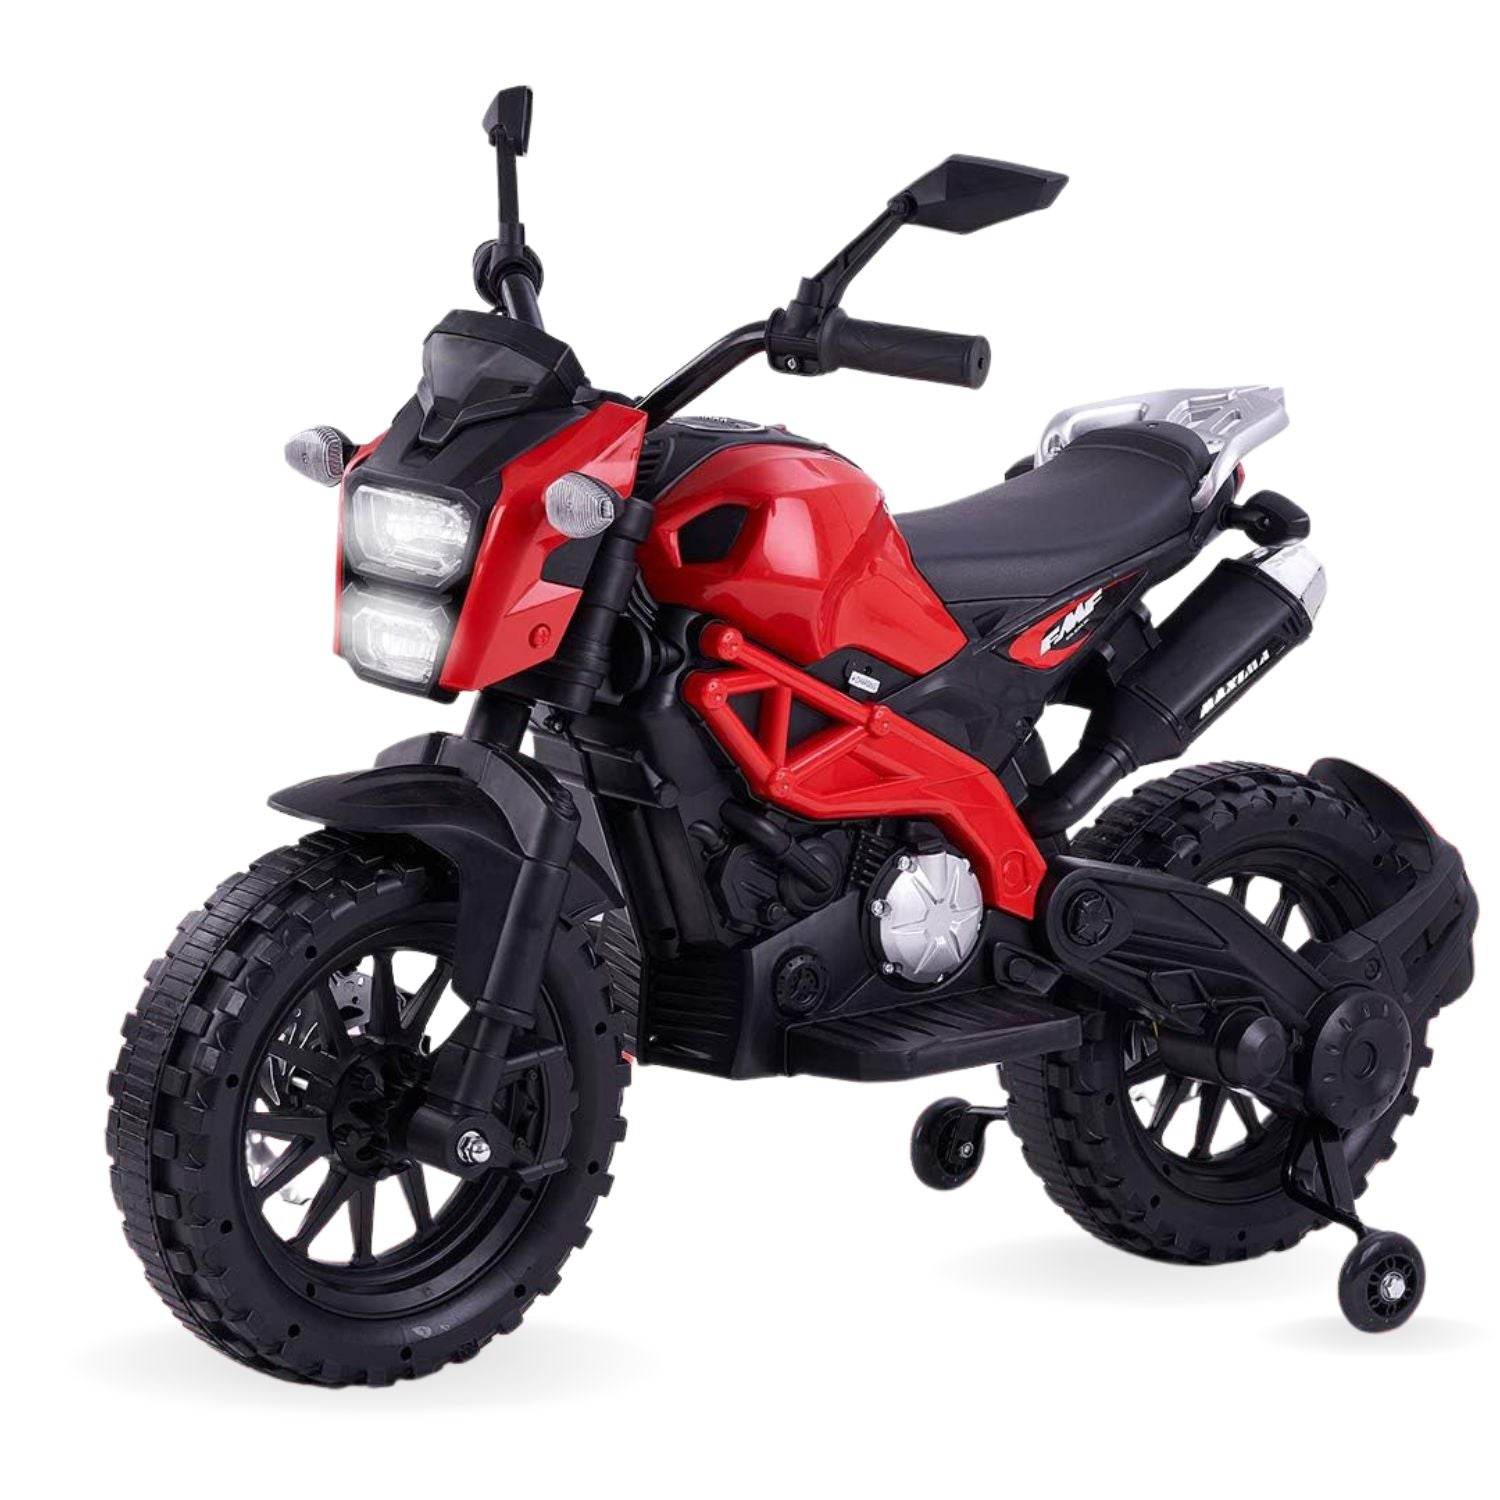 Baby Moo Electric Ride-on Bike for Kids | Battery-Powered Toy with LED Lights, Music, and USB Port | Battery Operated Bike - Red - Baby Moo